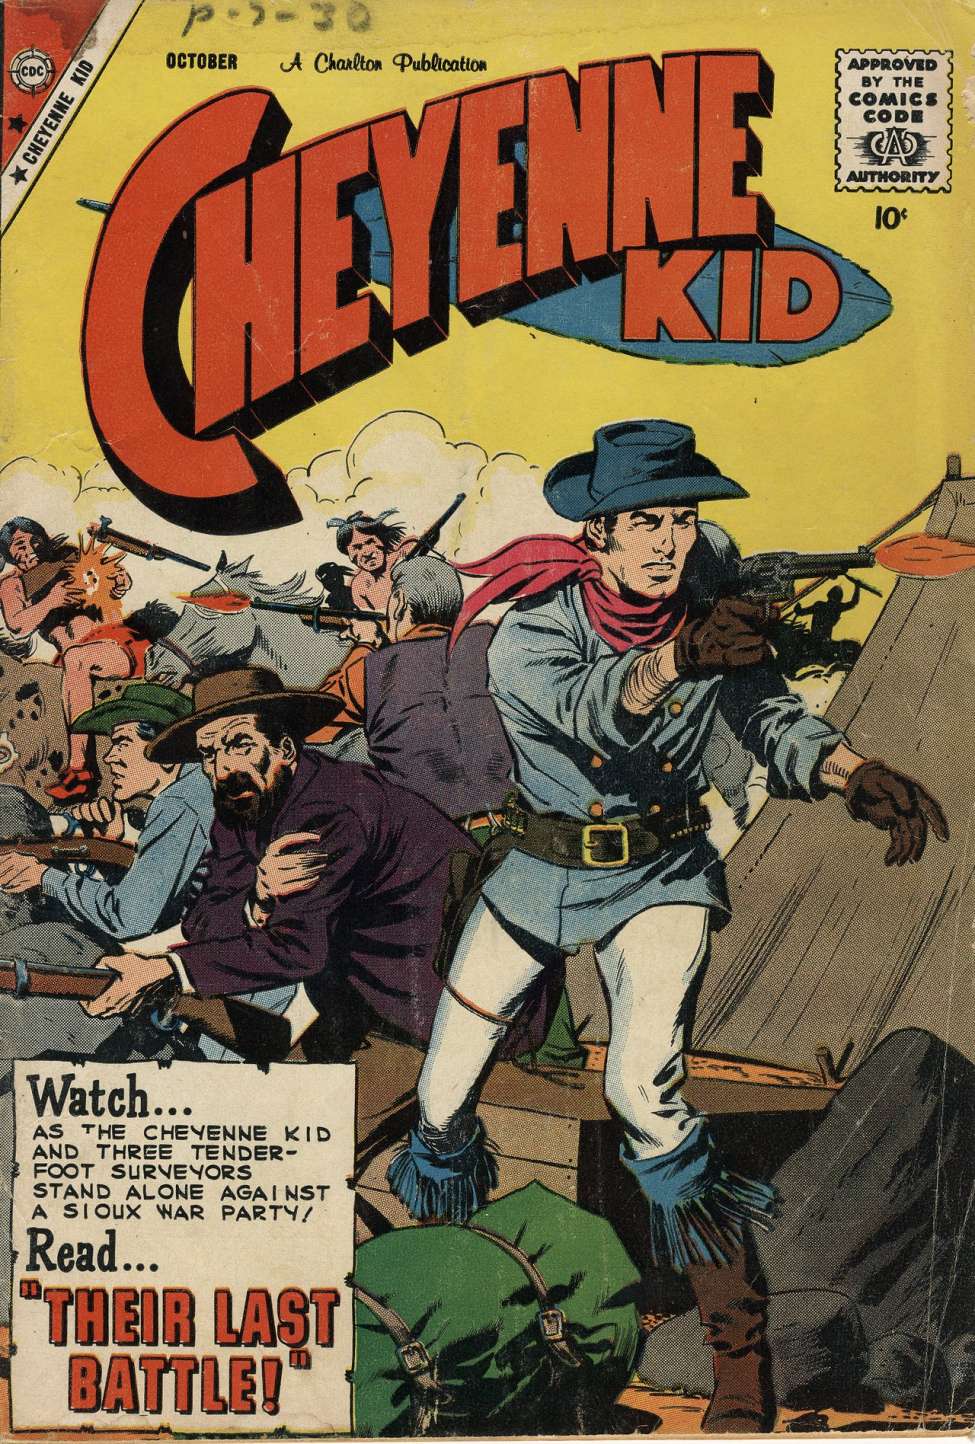 Book Cover For Cheyenne Kid 19